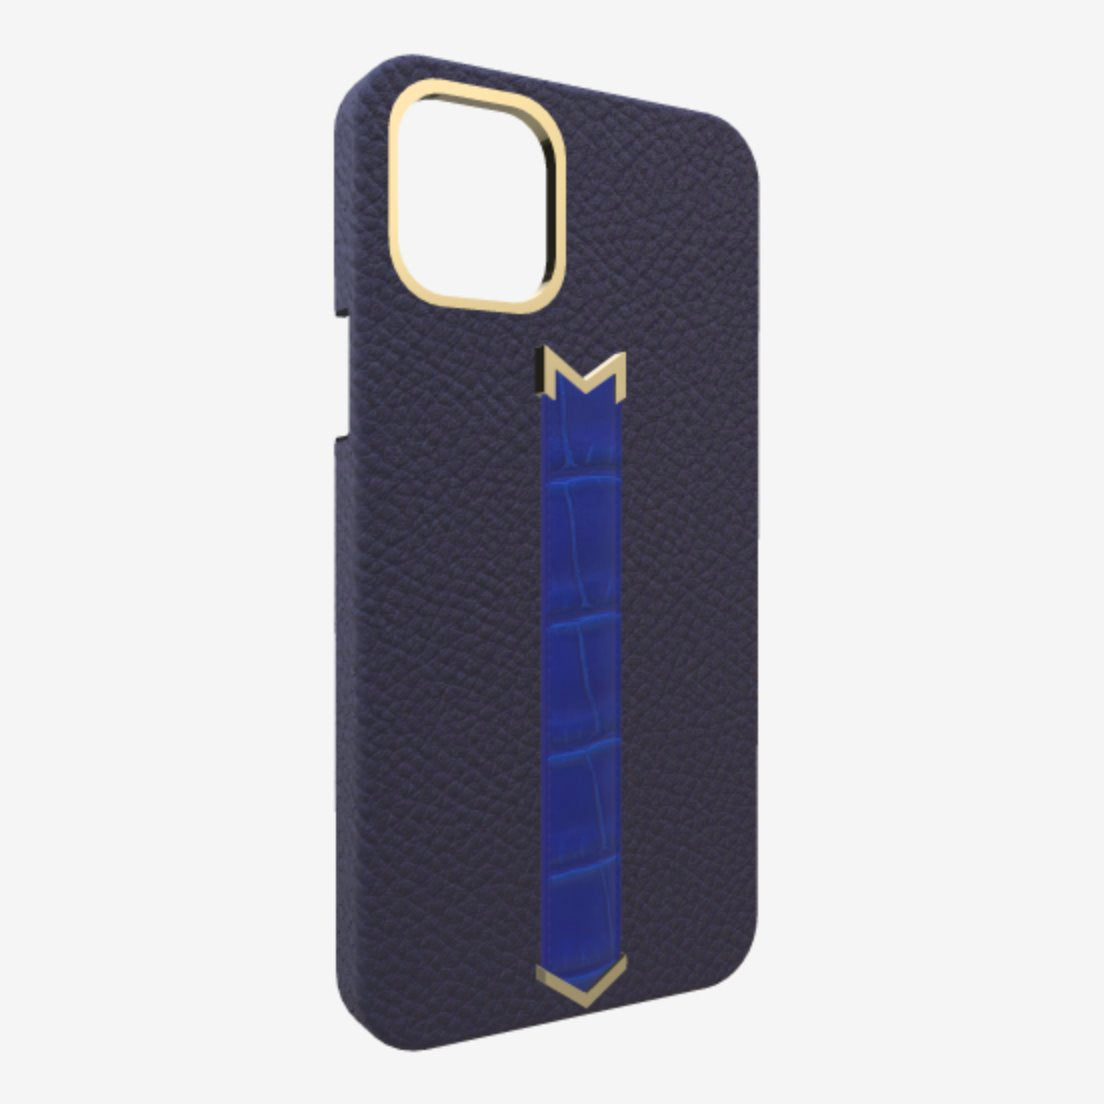 Gold Finger Strap Case for iPhone 13 in Genuine Calfskin and Alligator Navy Blue Electric Blue 